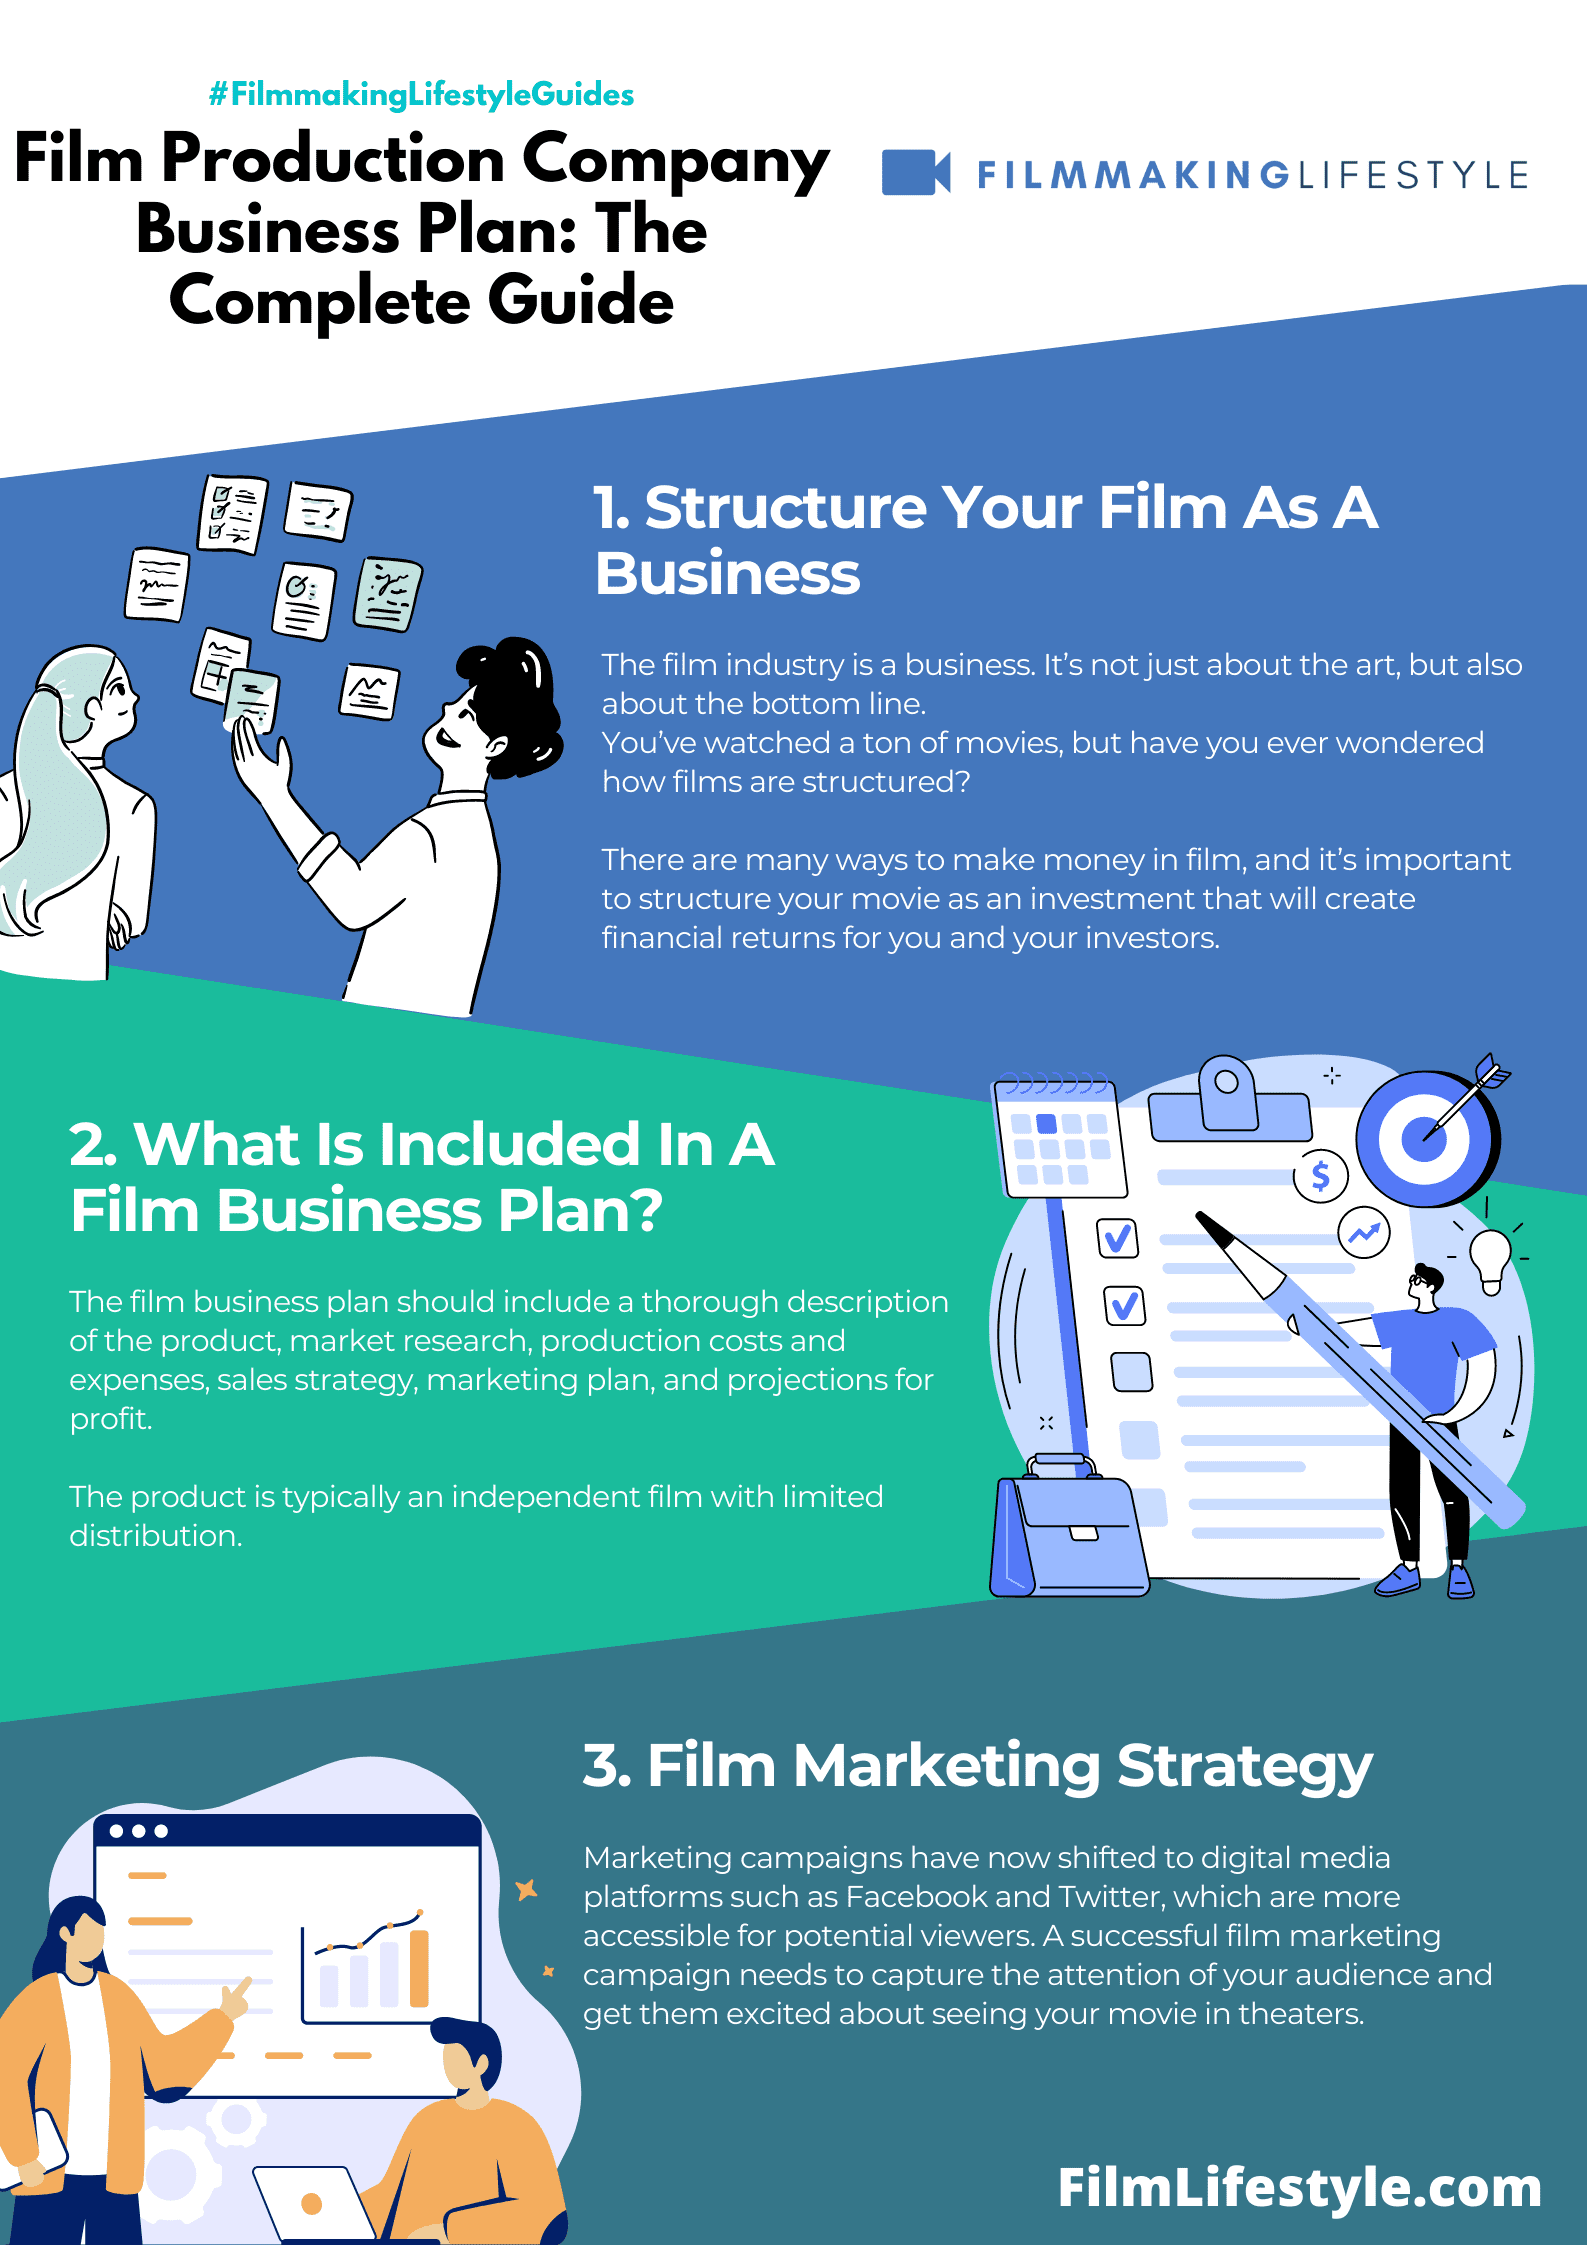 Film Production Company Business Plan